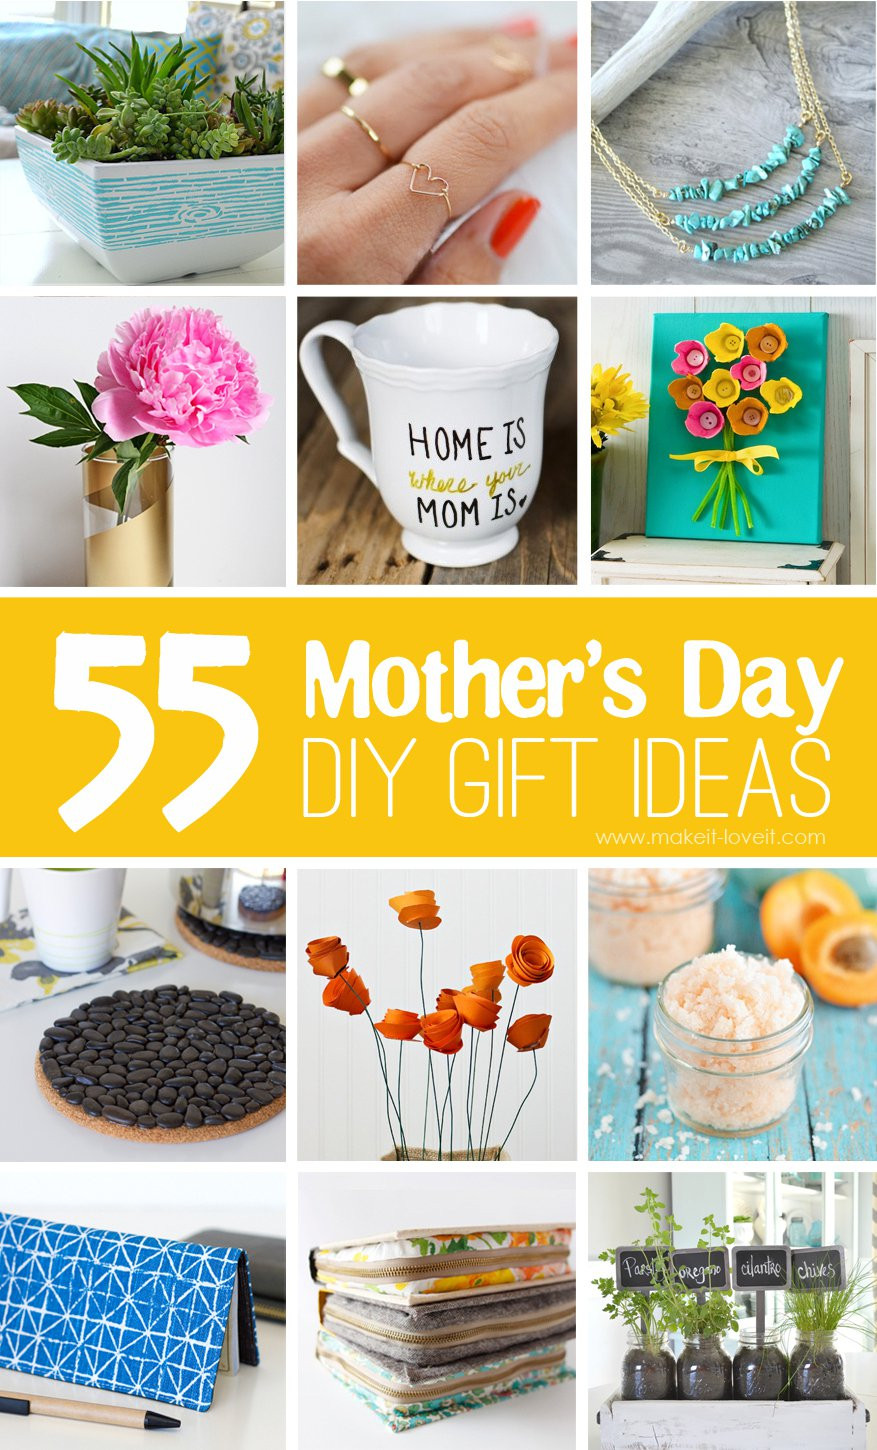 Mother's Day Ideas Diy
 40 Homemade Mother s Day Gift Ideas